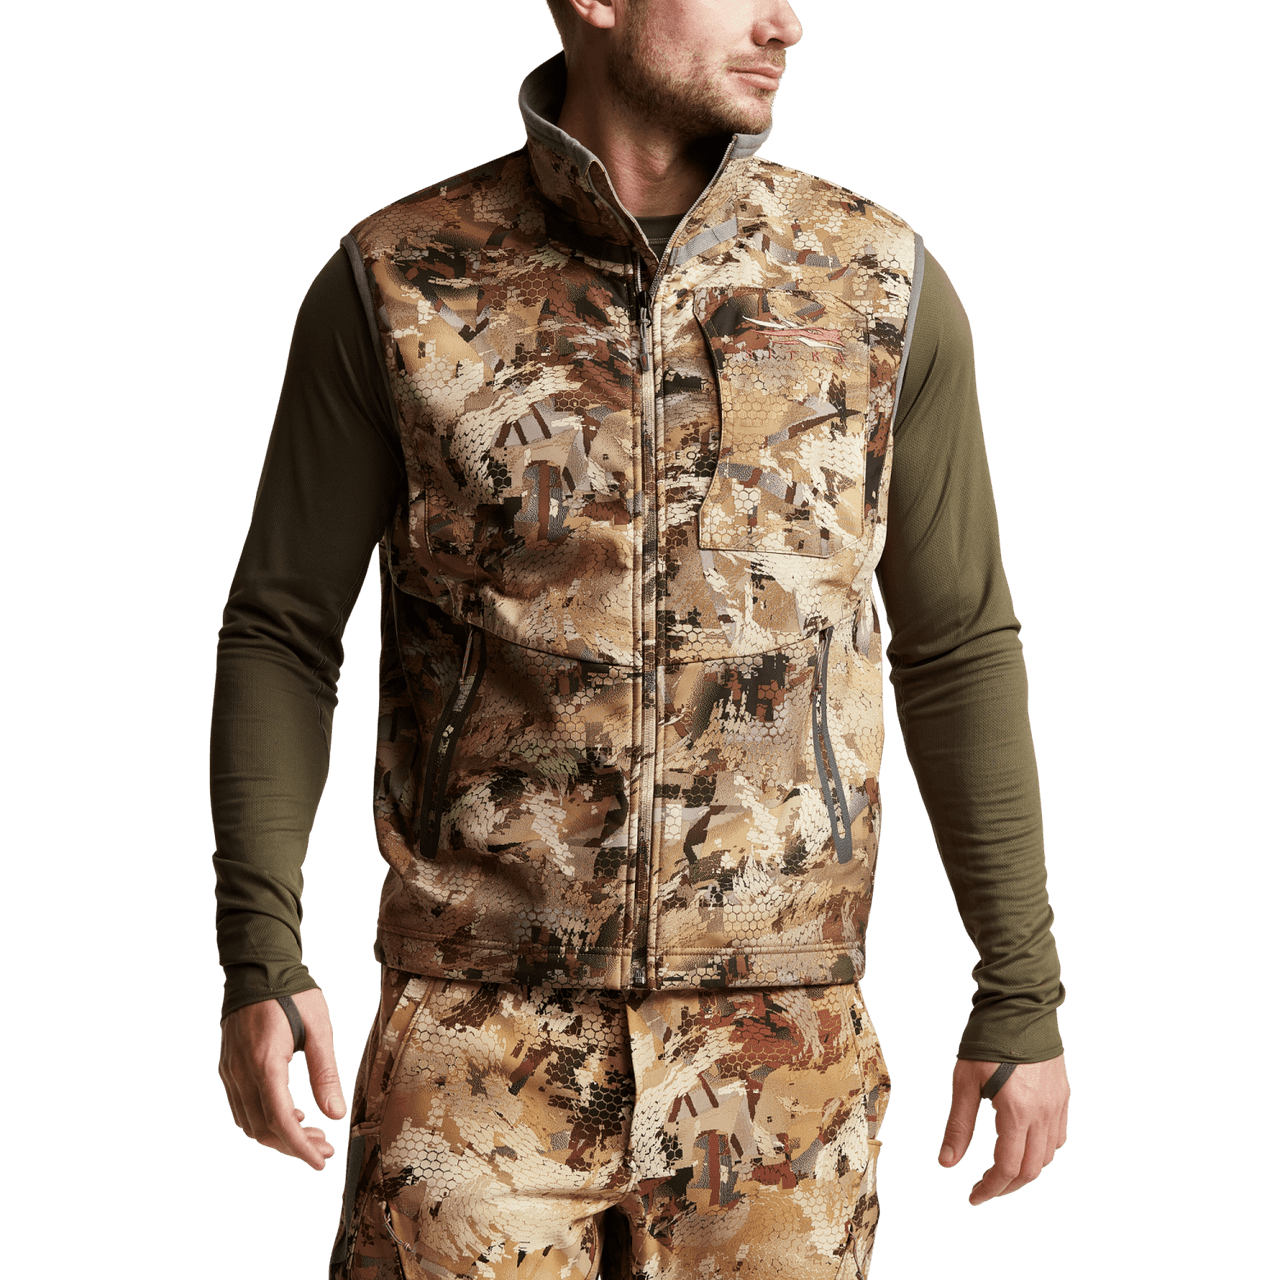 Sitka, Vest, Hunting, Clothing, Waterfowl